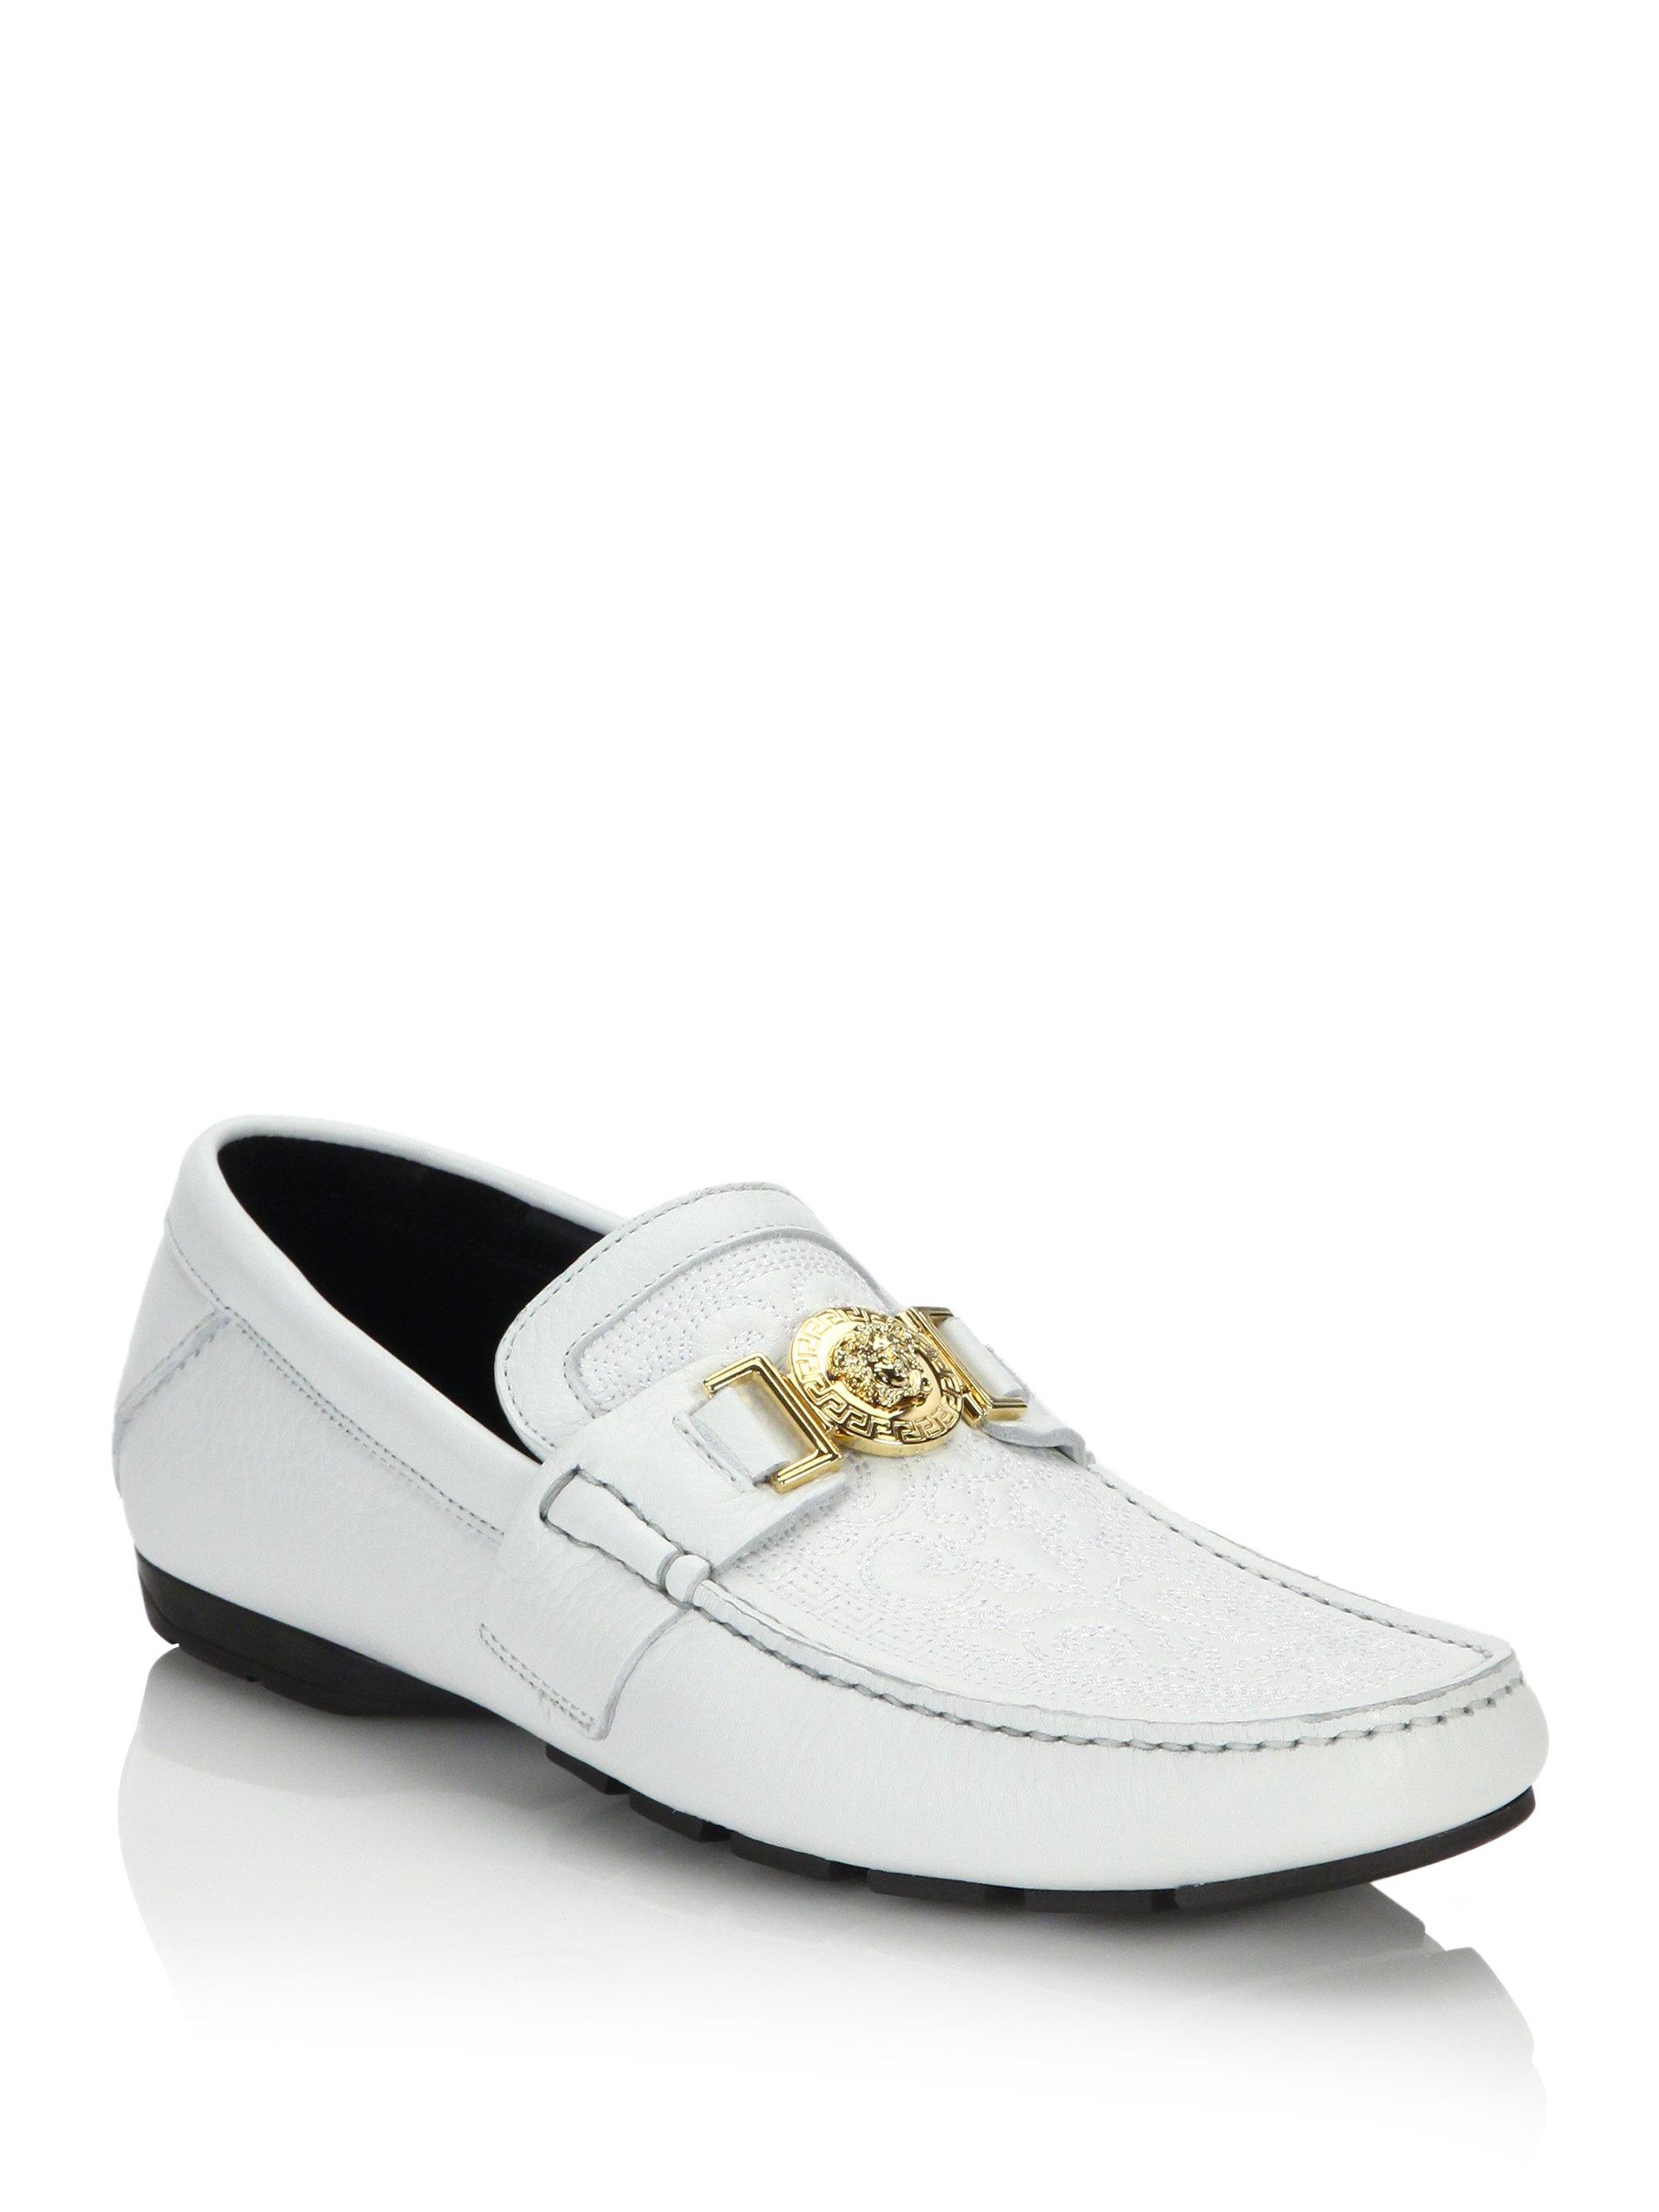 gold versace loafers